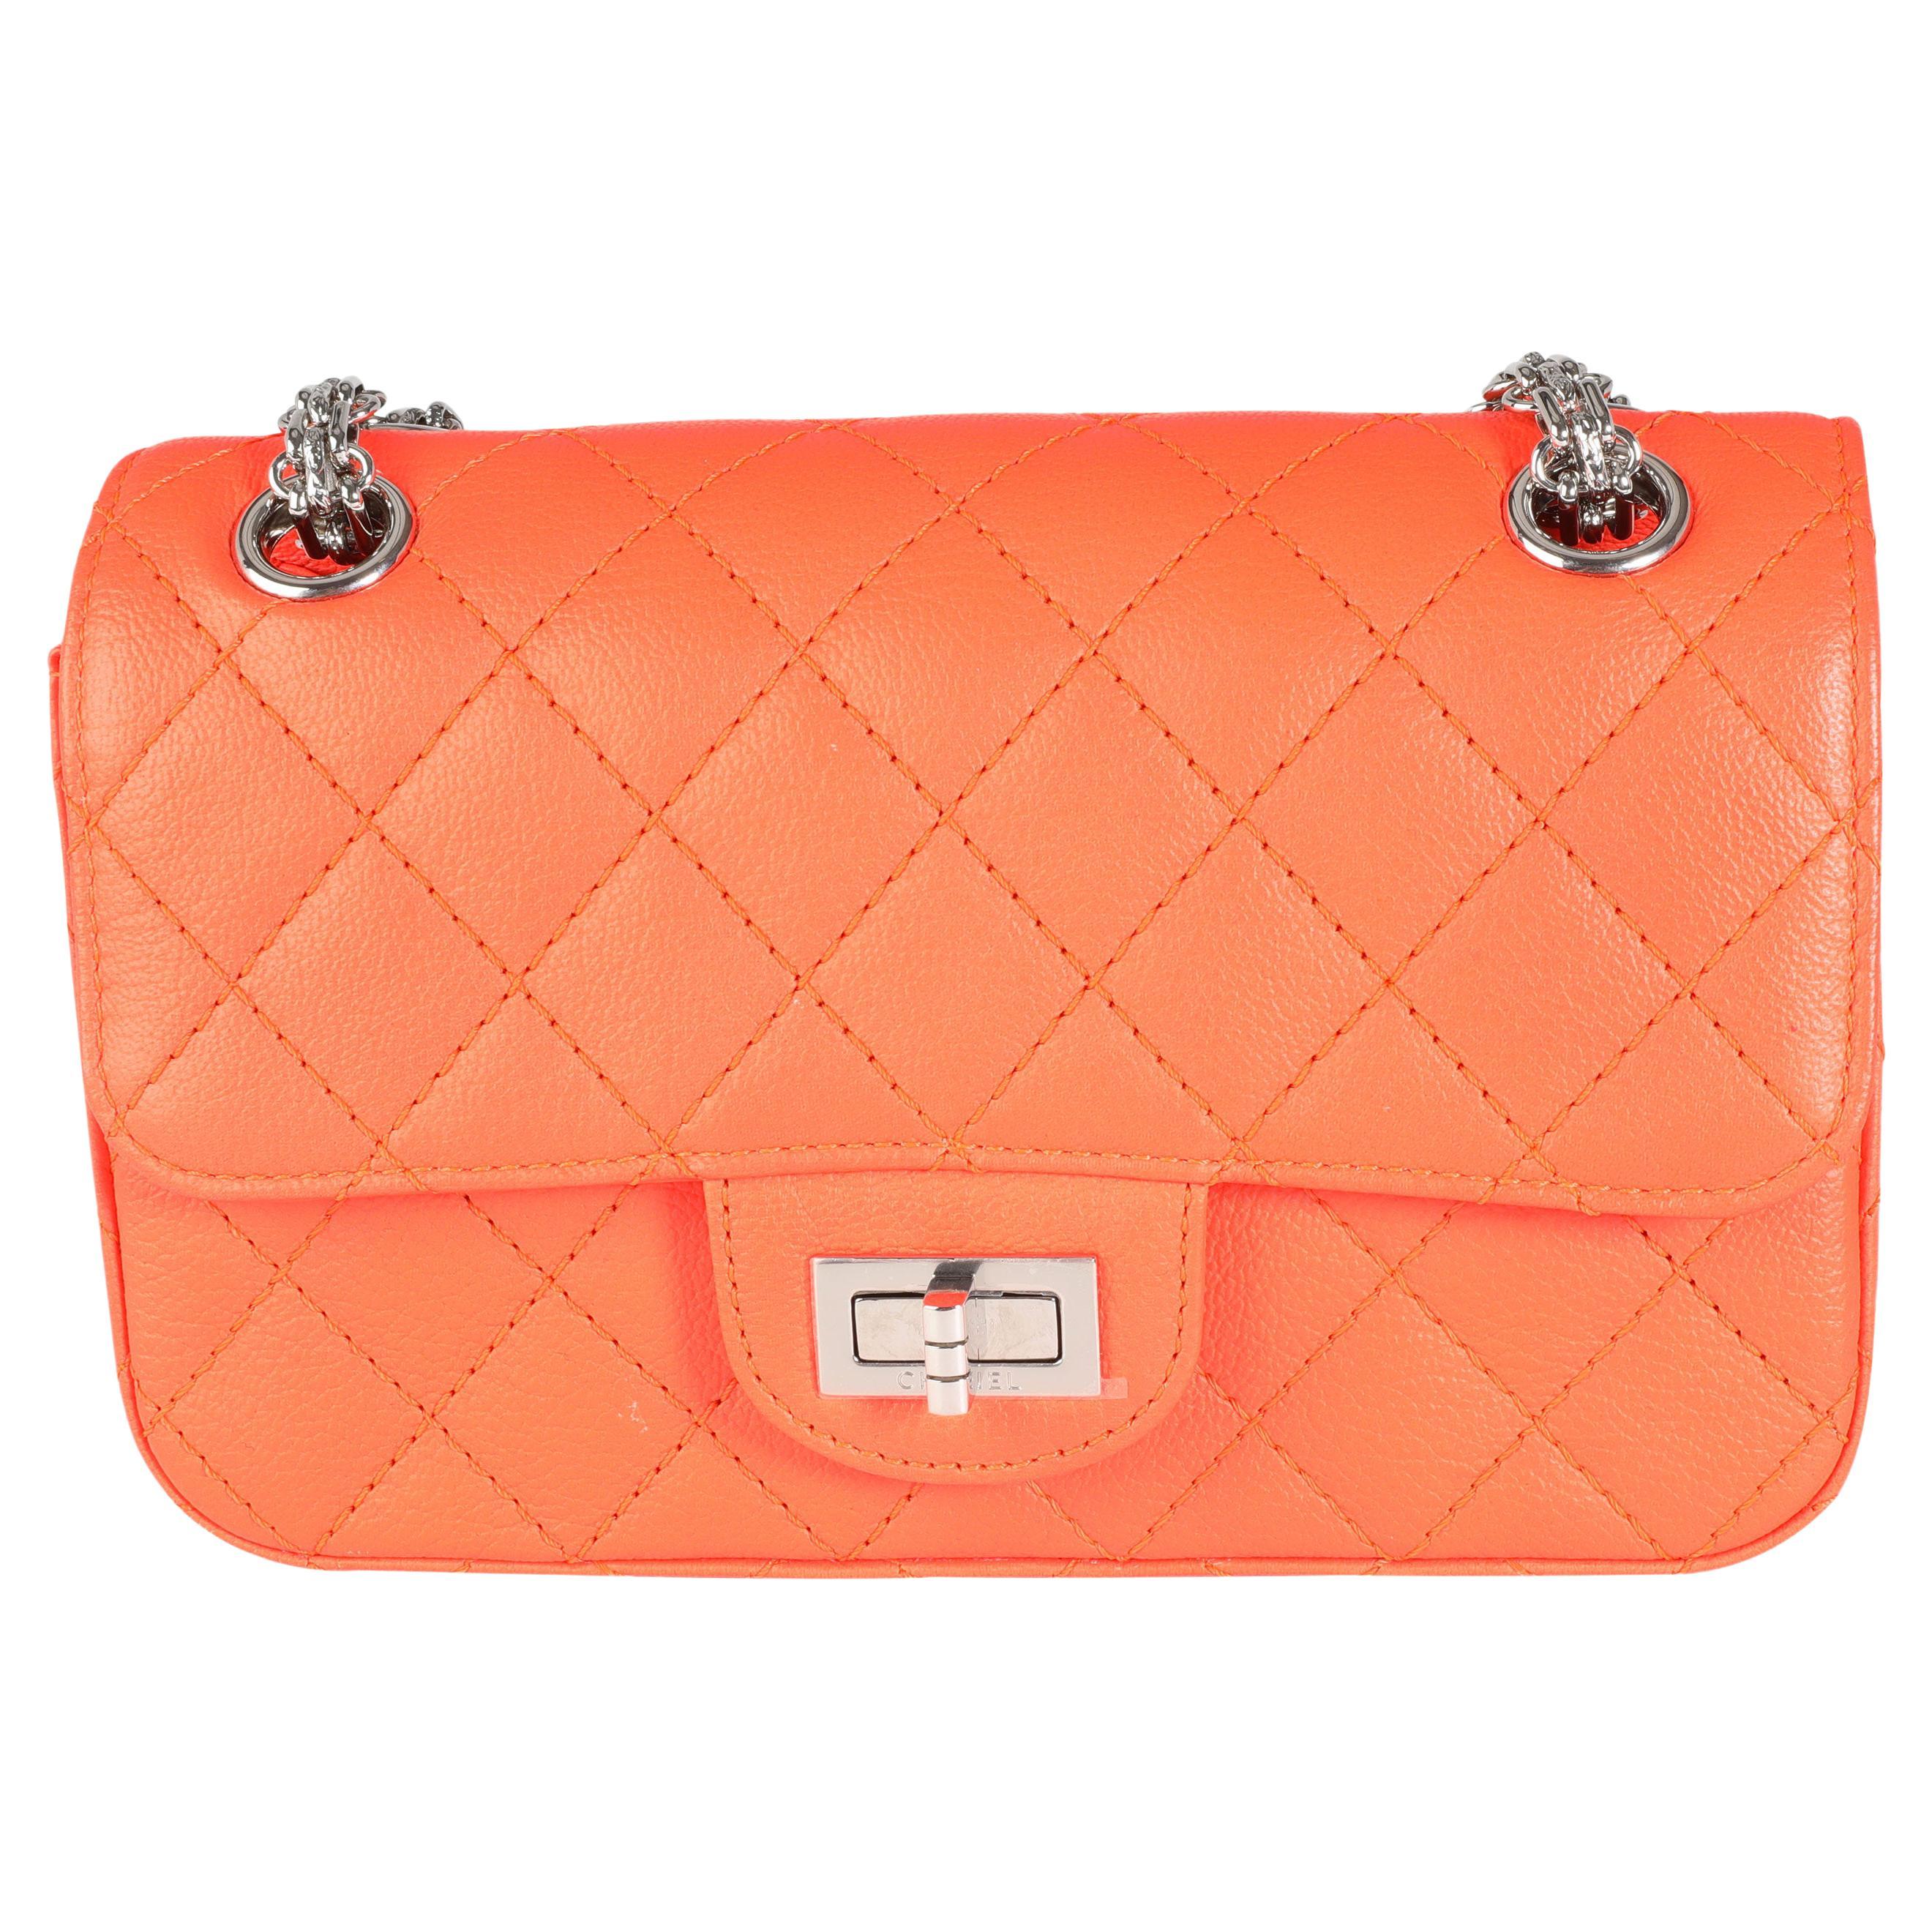 Chanel Neon Orange Quilted Chévre Leather Reissue 2.55 224 Bag